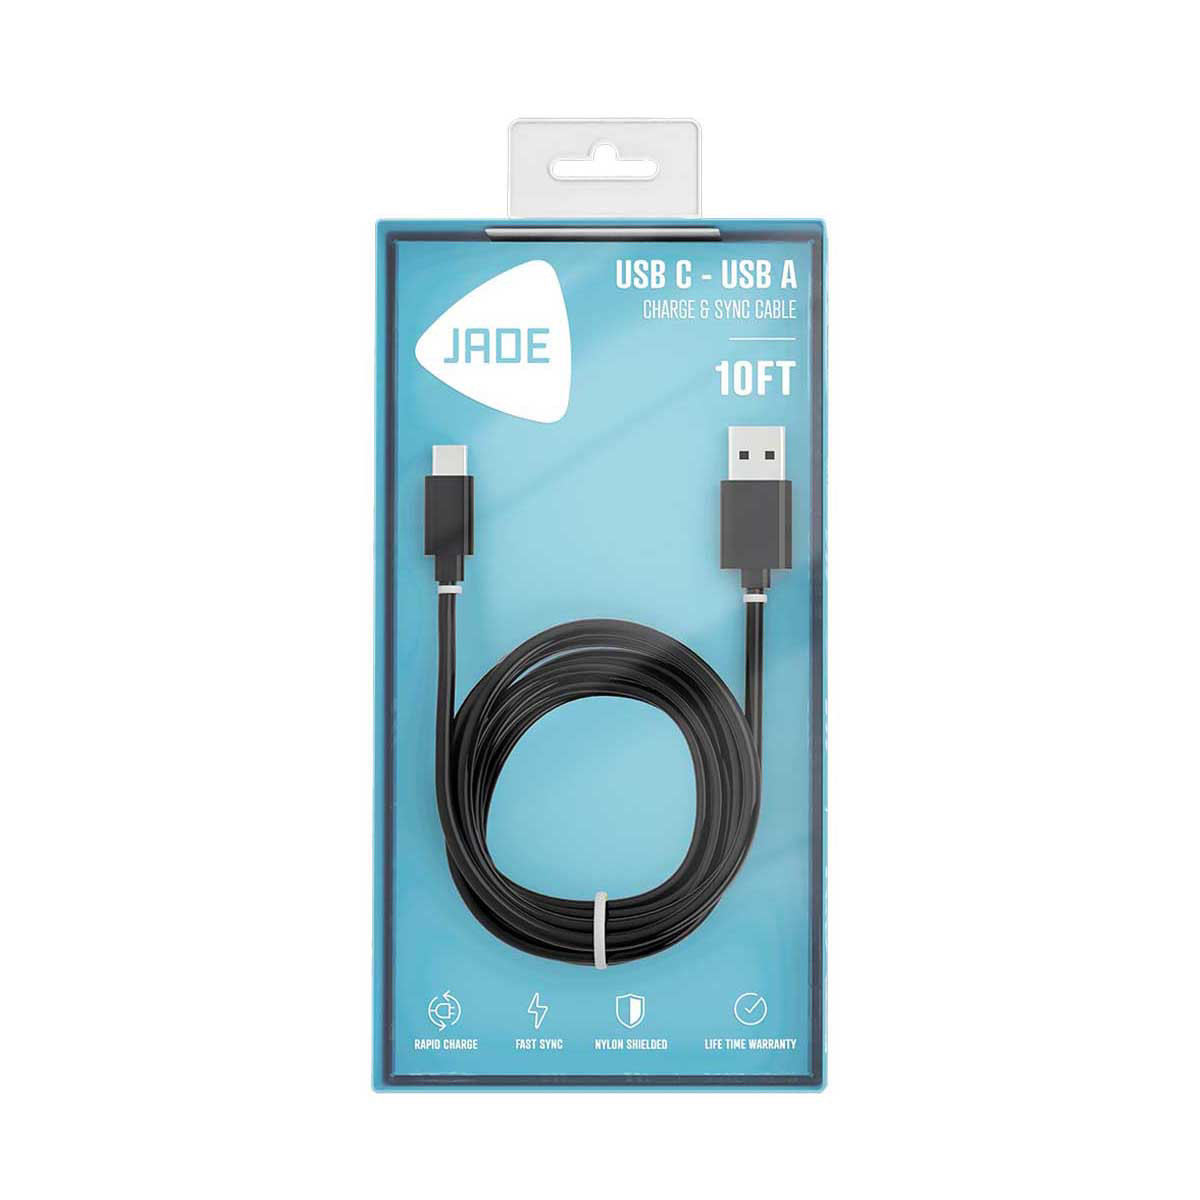 Jade USB-A to USB-C Phone Charge Cable, Black, 10 ft